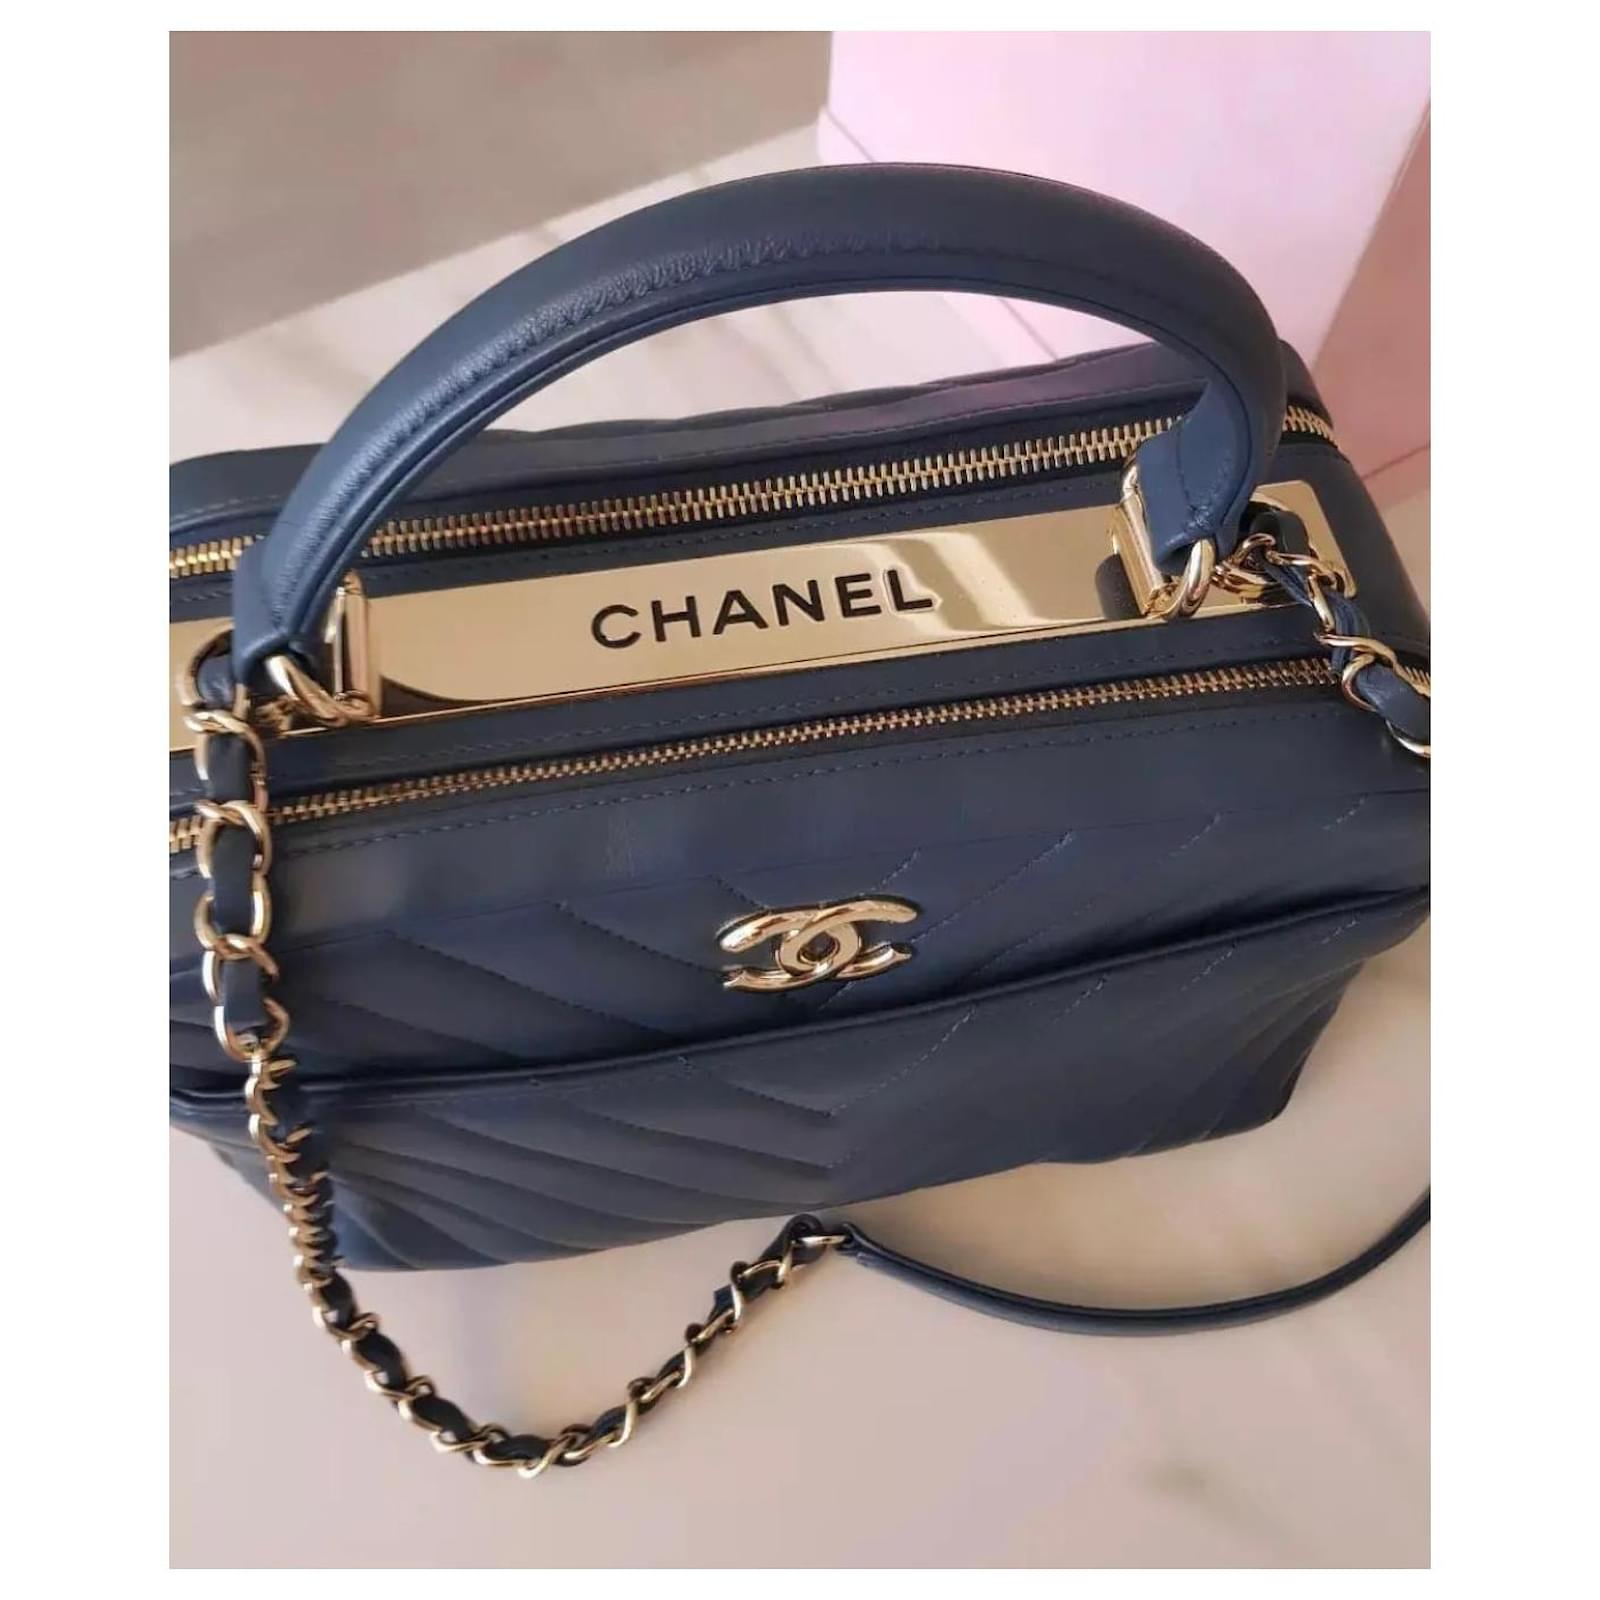 Chanel 2019 Medium Chevron Trendy CC bowling bag in Navy Blue with Gold  Hardware